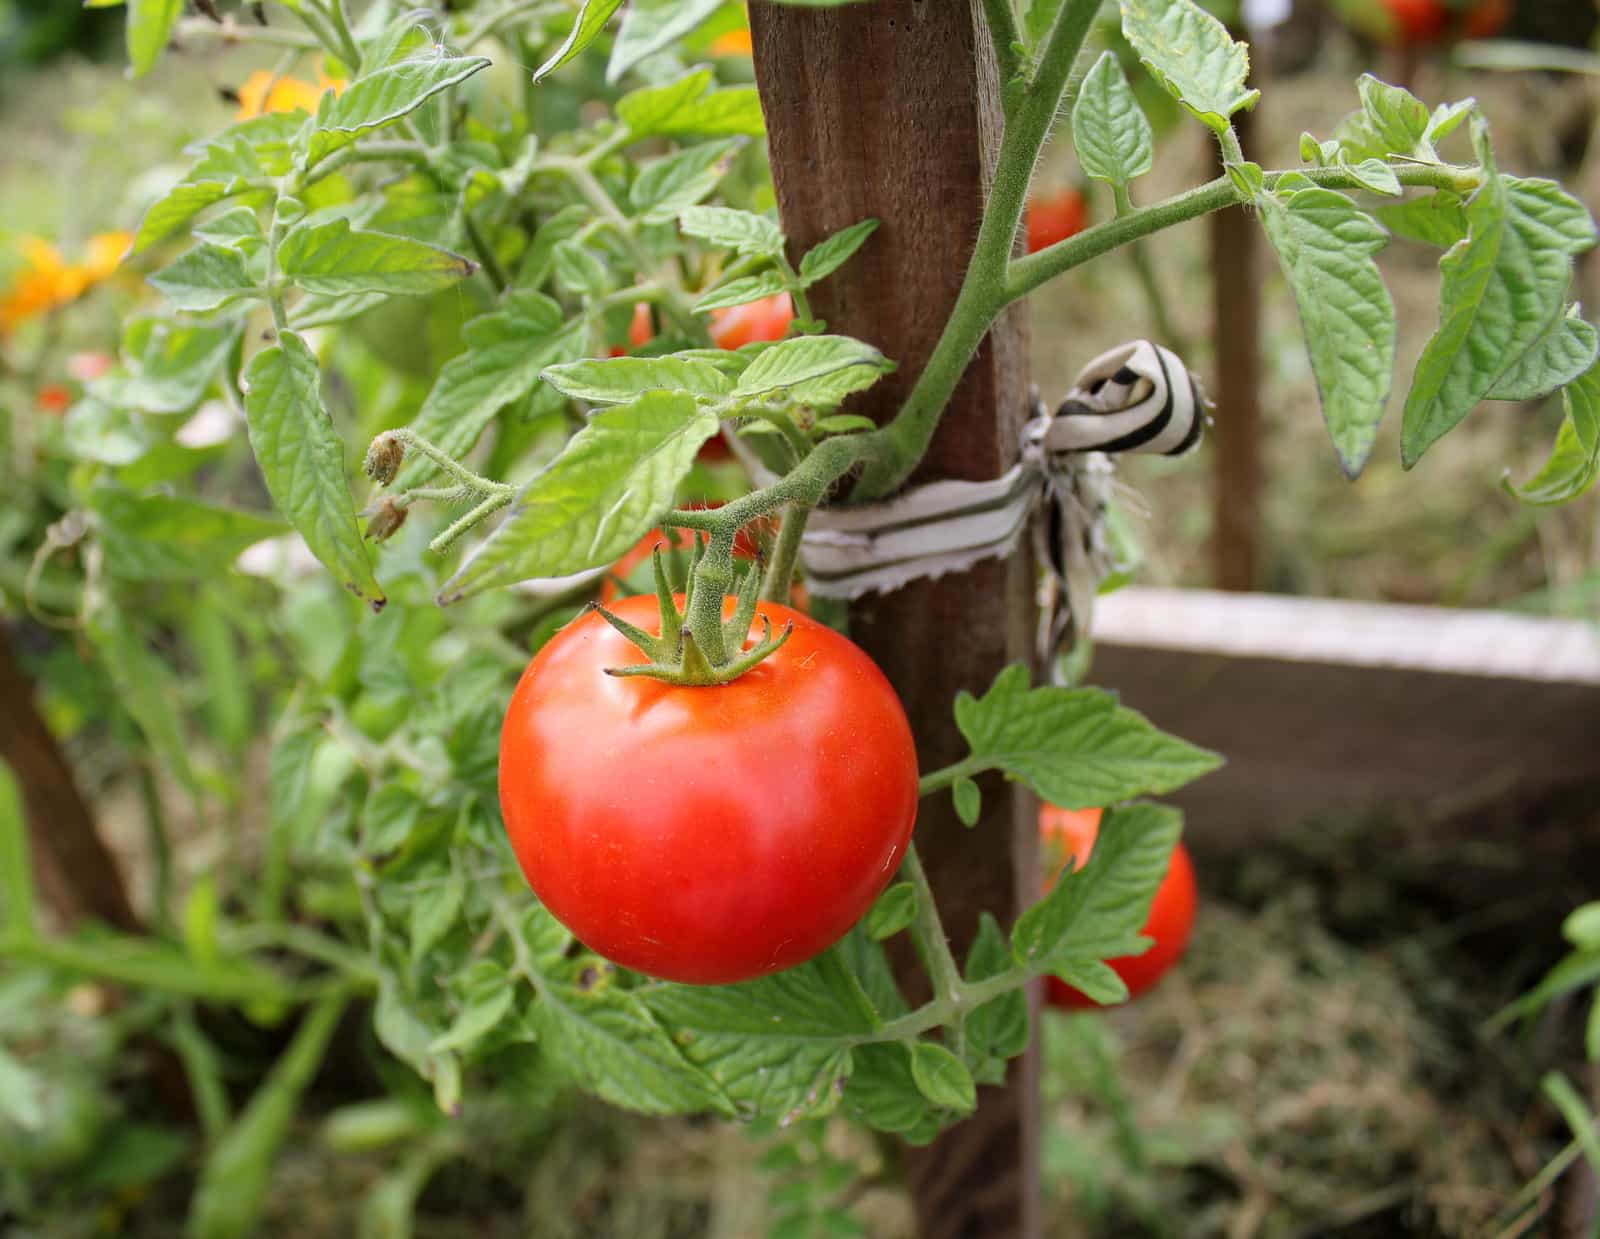 Planning Ahead to Get an Early Start on Bell Peppers and Tomatoes in the Winter Months